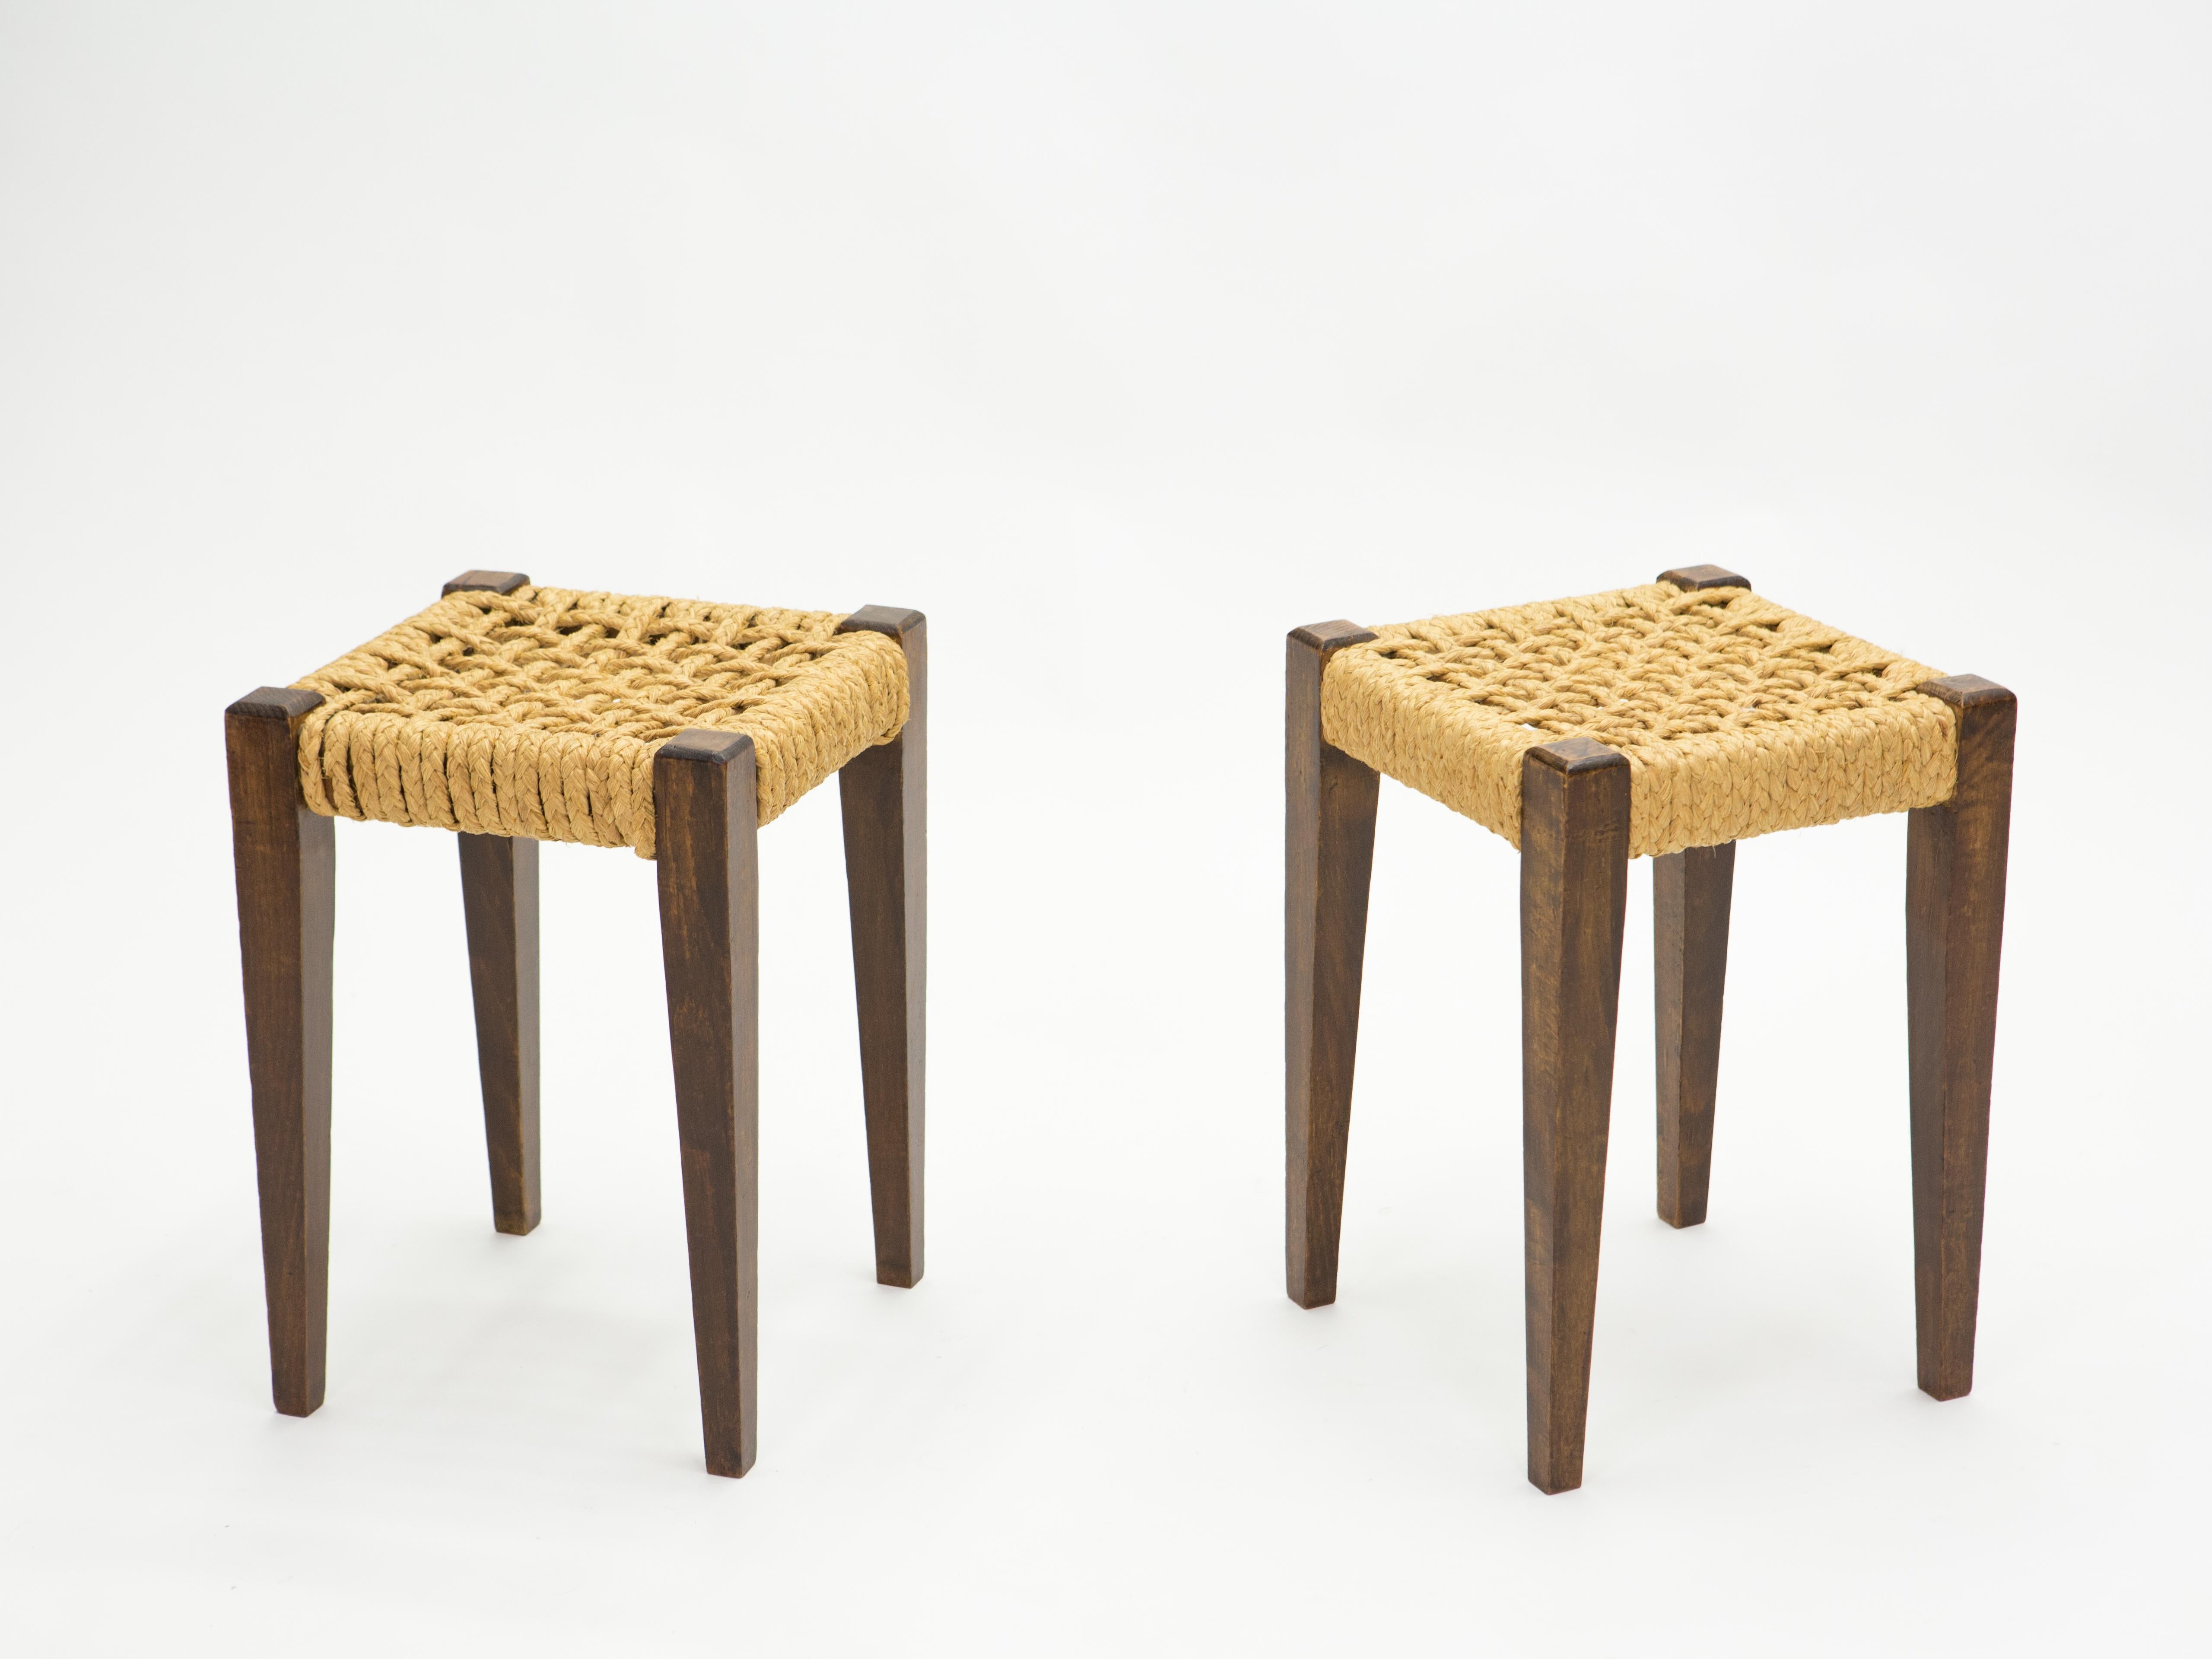 Beautiful patina is evident along the abaca rope seating of this pair of stools by Adrien Audoux et Frida Minet, giving away their vintage status. This natural style is typical of the French design of Audoux-Minet. Timeless Mid-Century Modern design